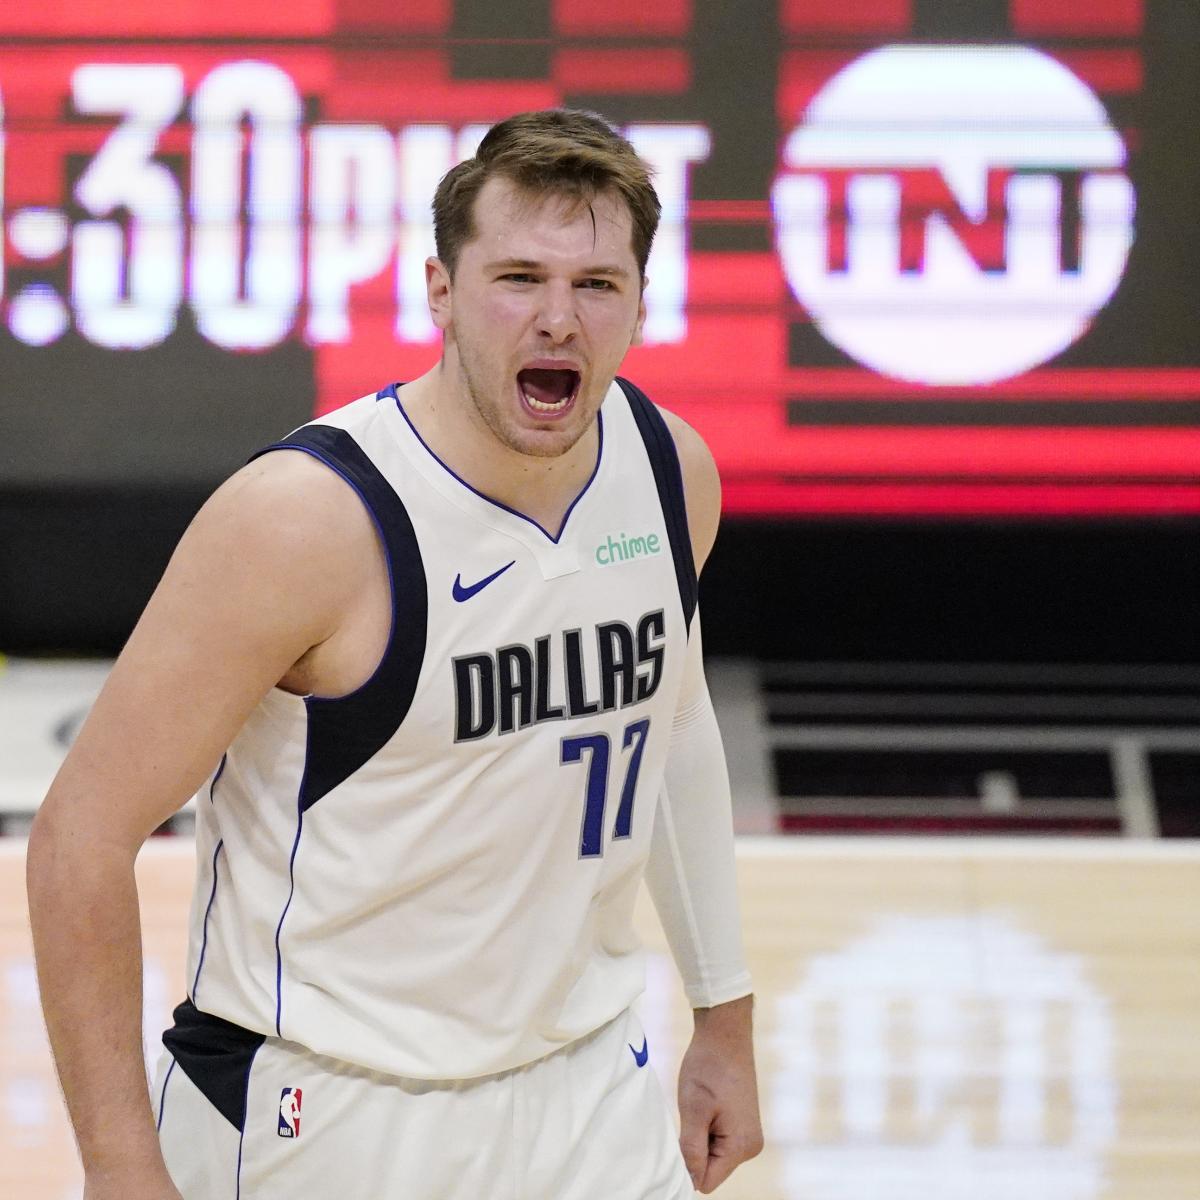 Only one rookie finished among the NBA's top 15 most popular jerseys:  Mavericks phenom Luka Doncic